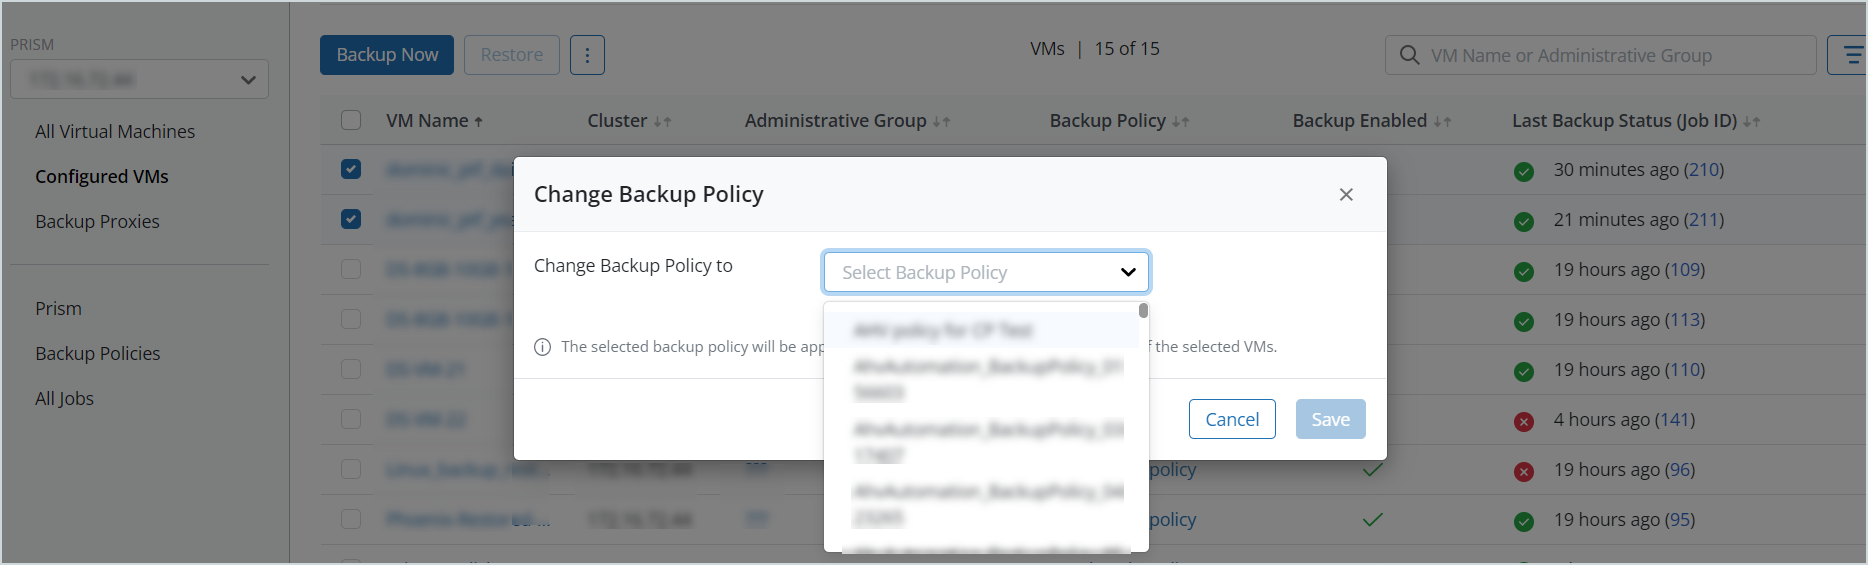 Change backup policy dialog.png